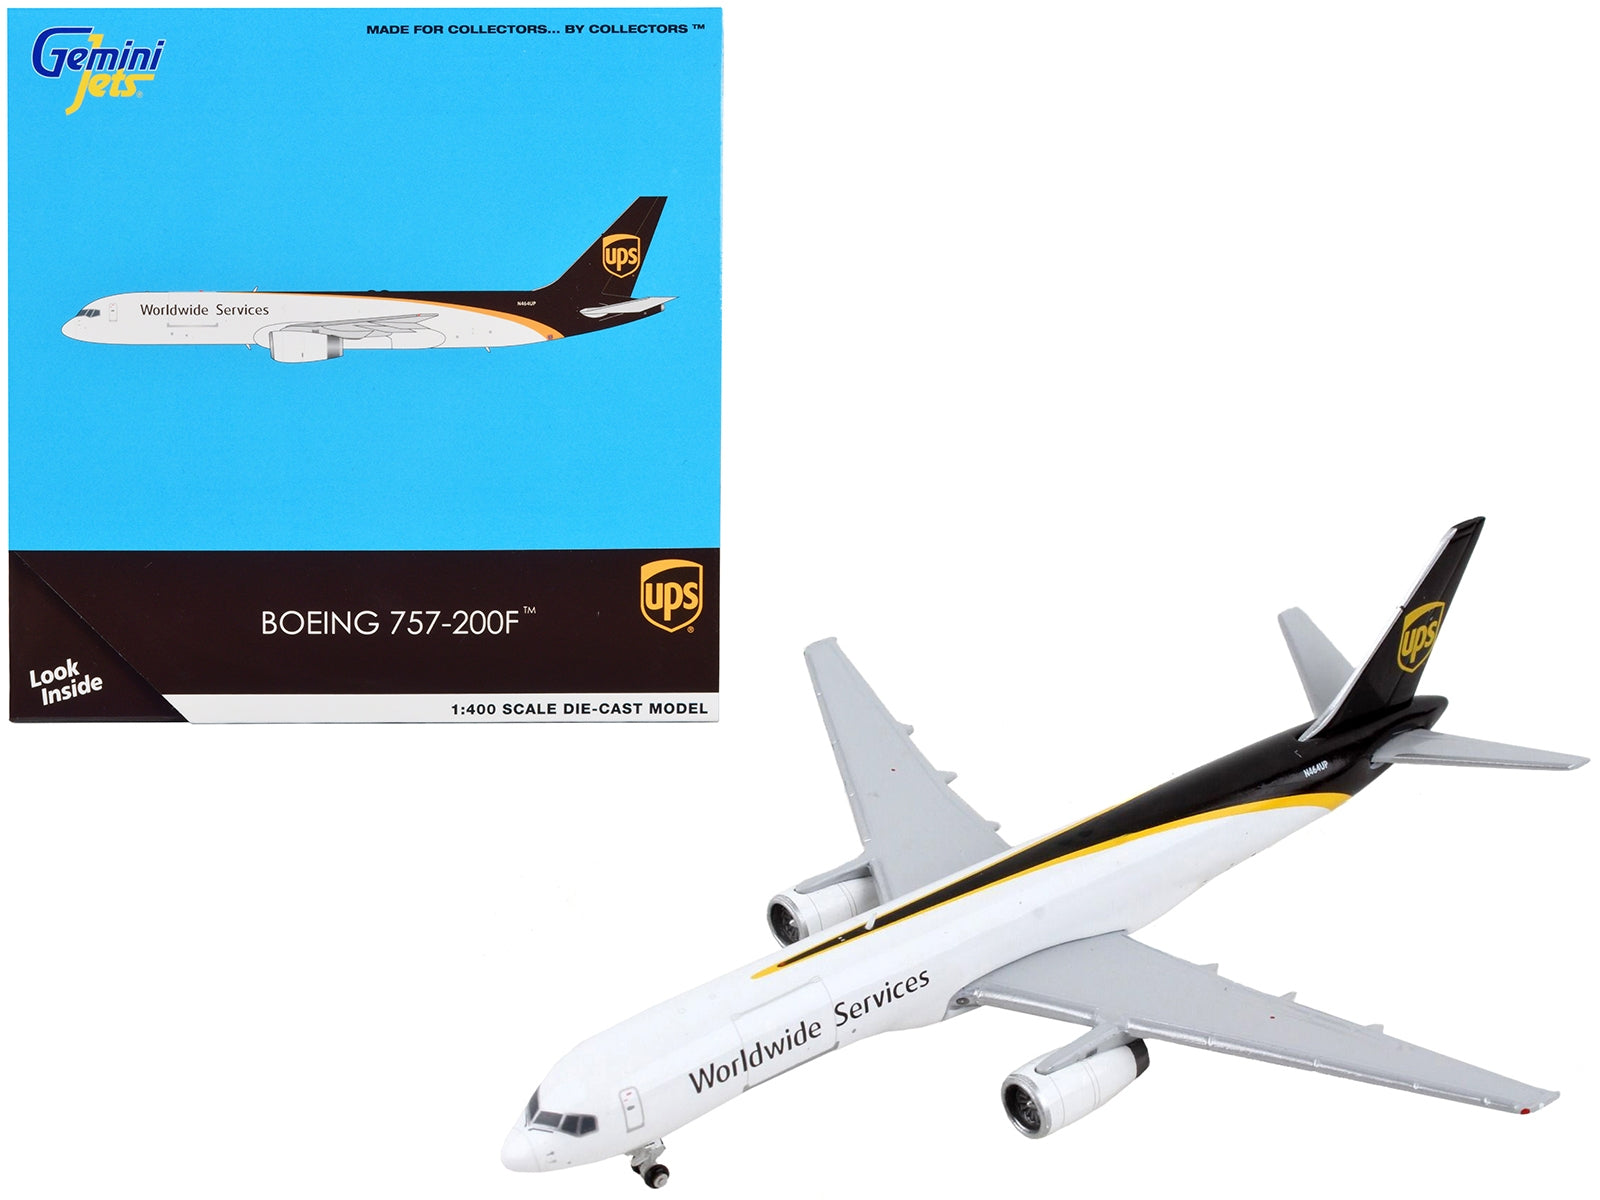 Boeing 757-200F Commercial Aircraft "UPS (United Parcel Service) - Worldwide Services" White and Dark Brown 1/400 Diecast Model Airplane by GeminiJets